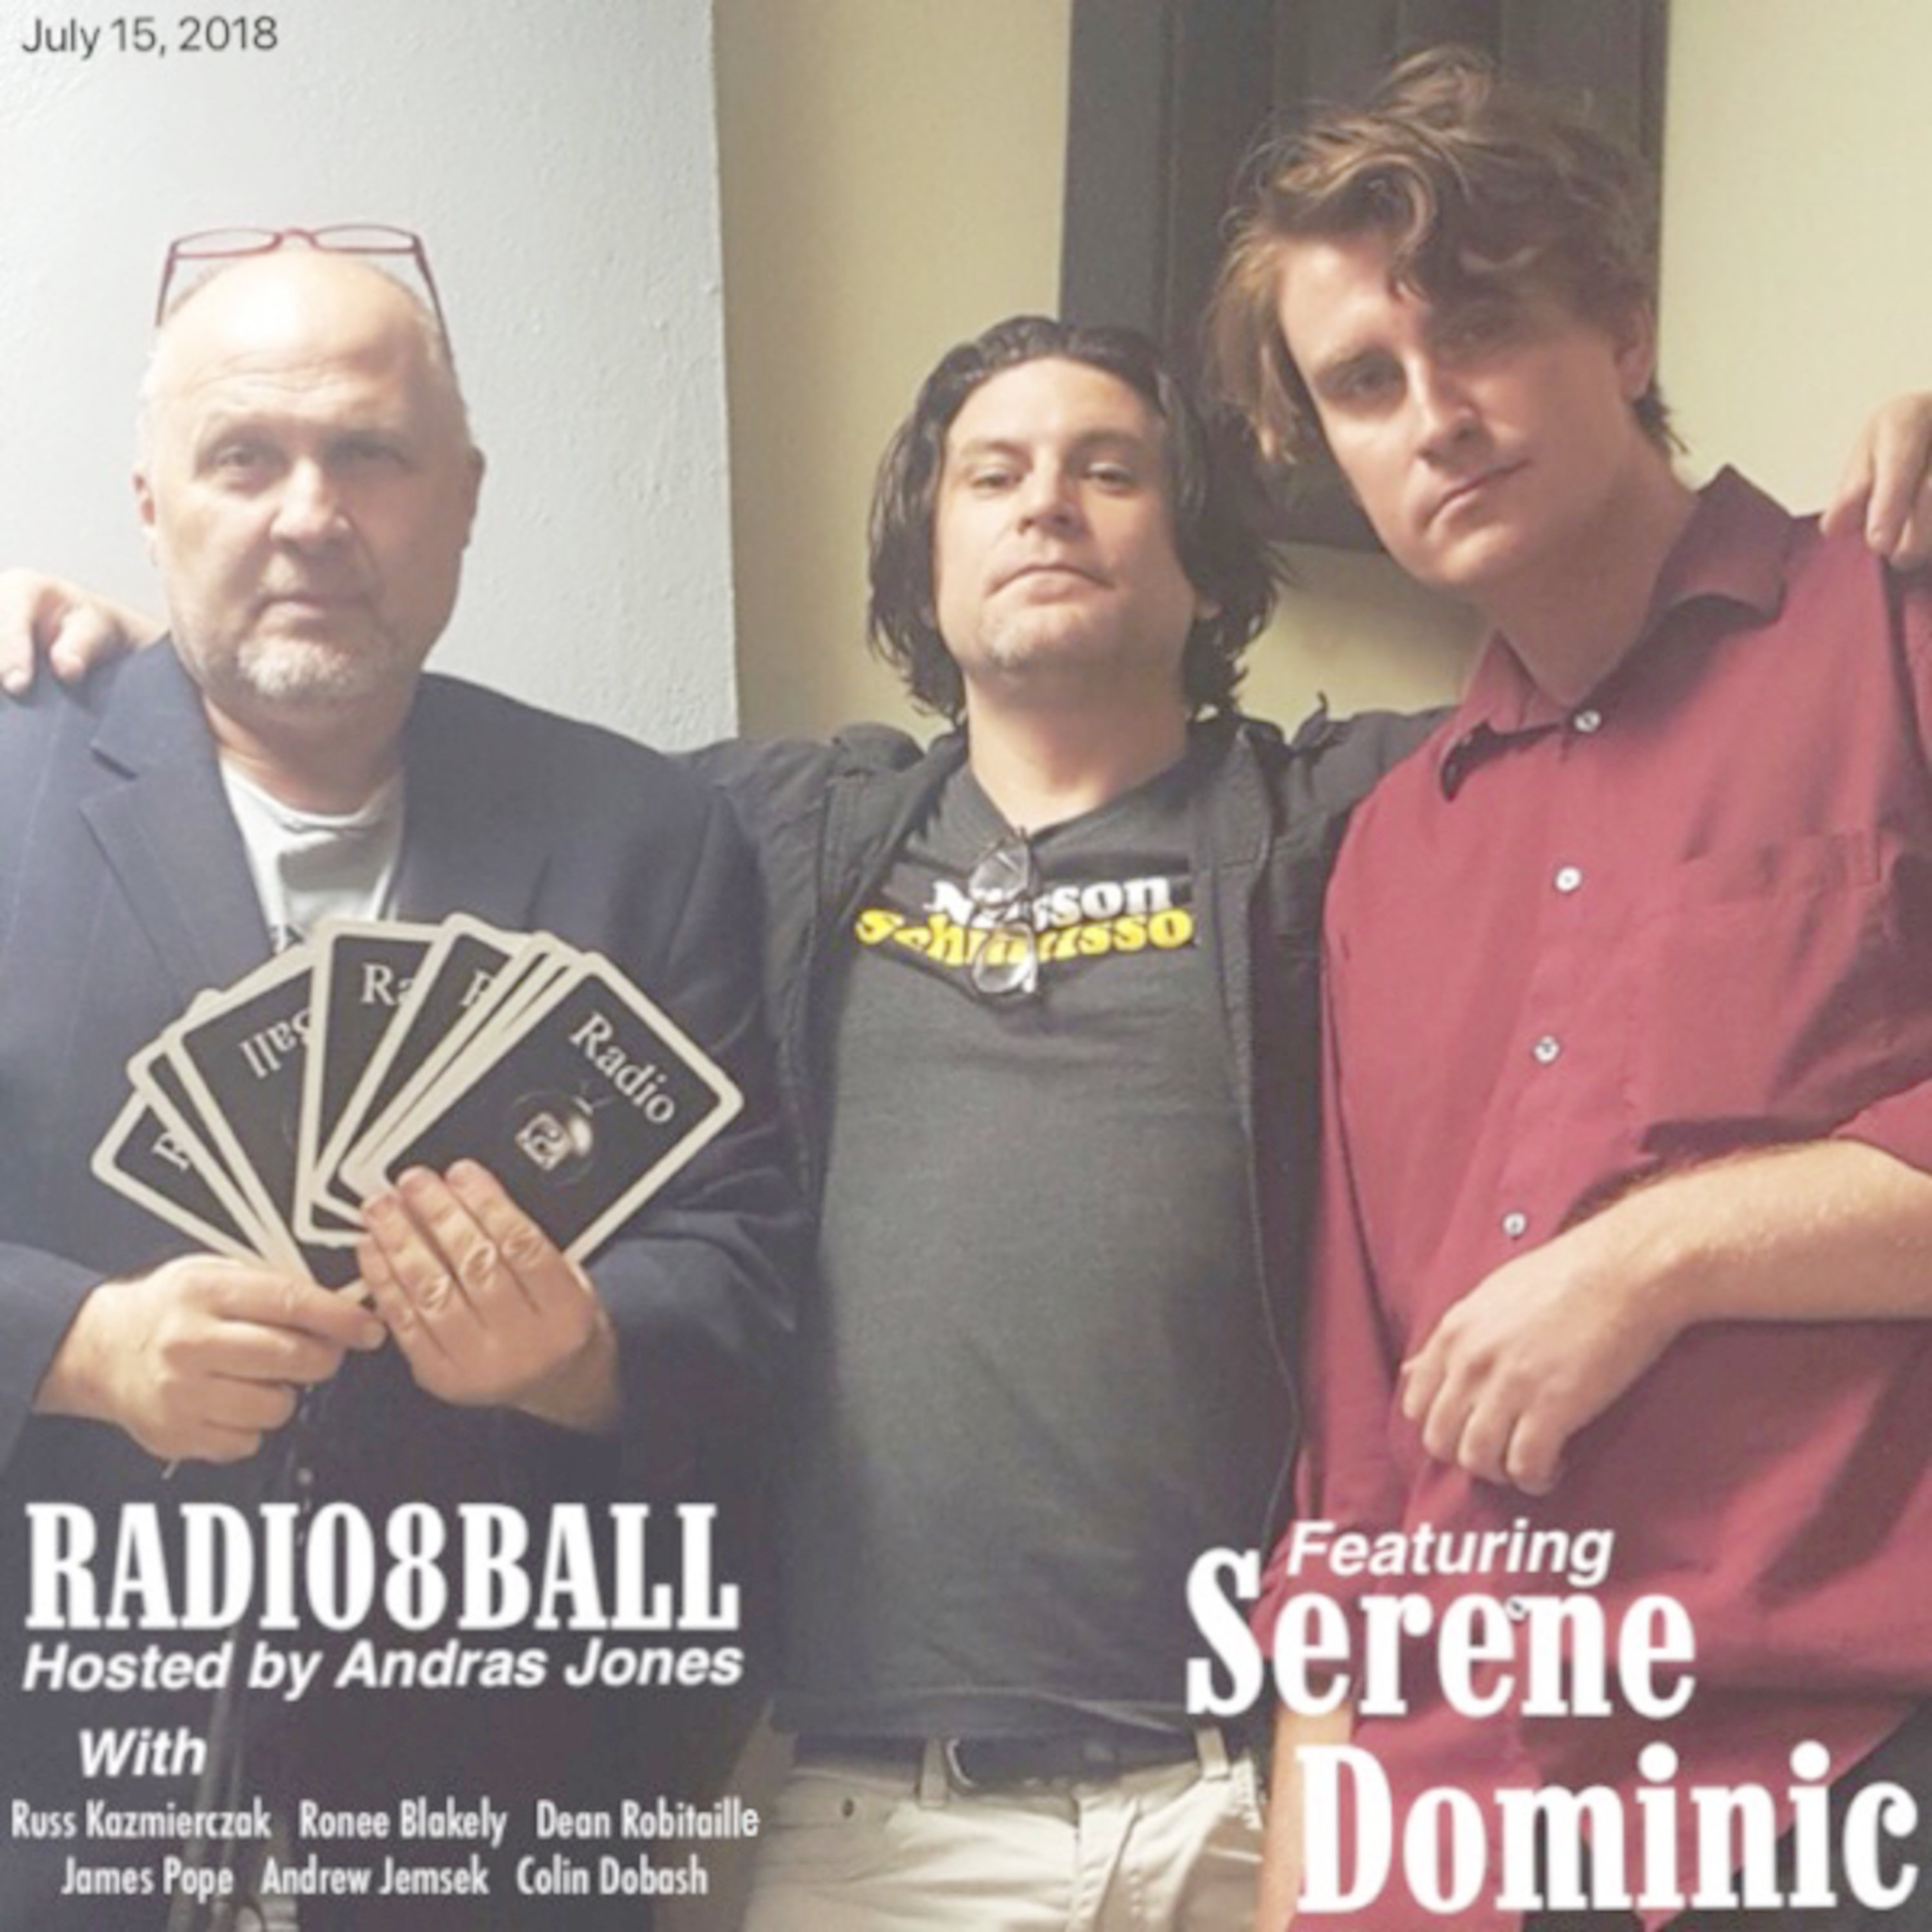 308: Dean Robitaille & Serene Dominic (July 15, 2018 - Pod 4)